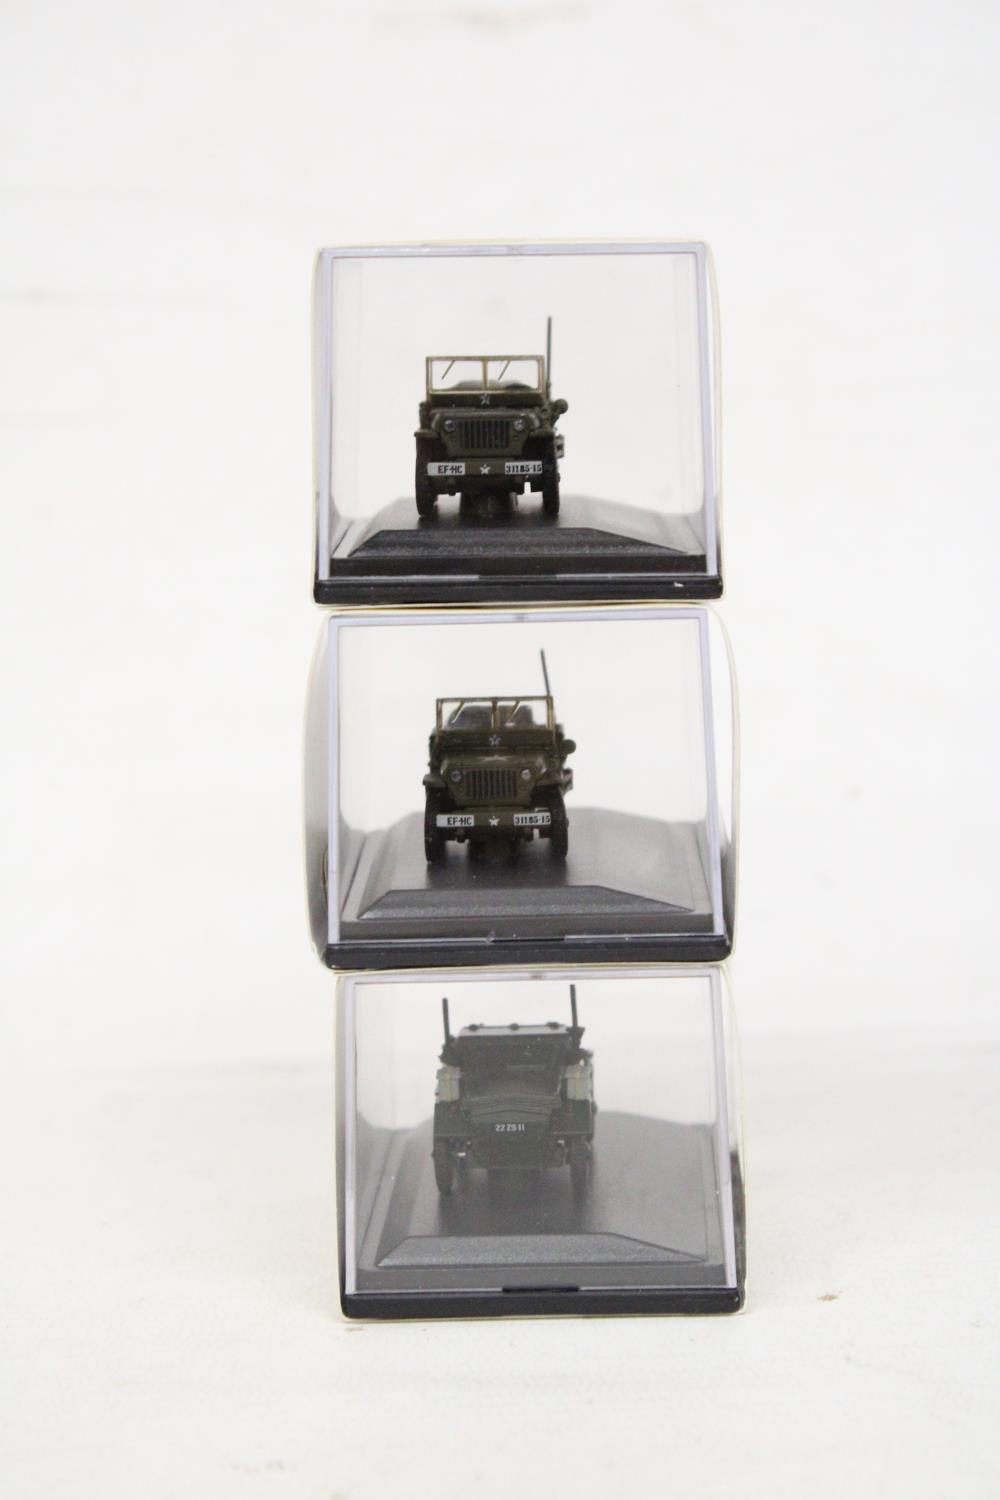 SIX AS NEW AND BOXED OXFORD MILITARY VEHICLES - Image 5 of 6